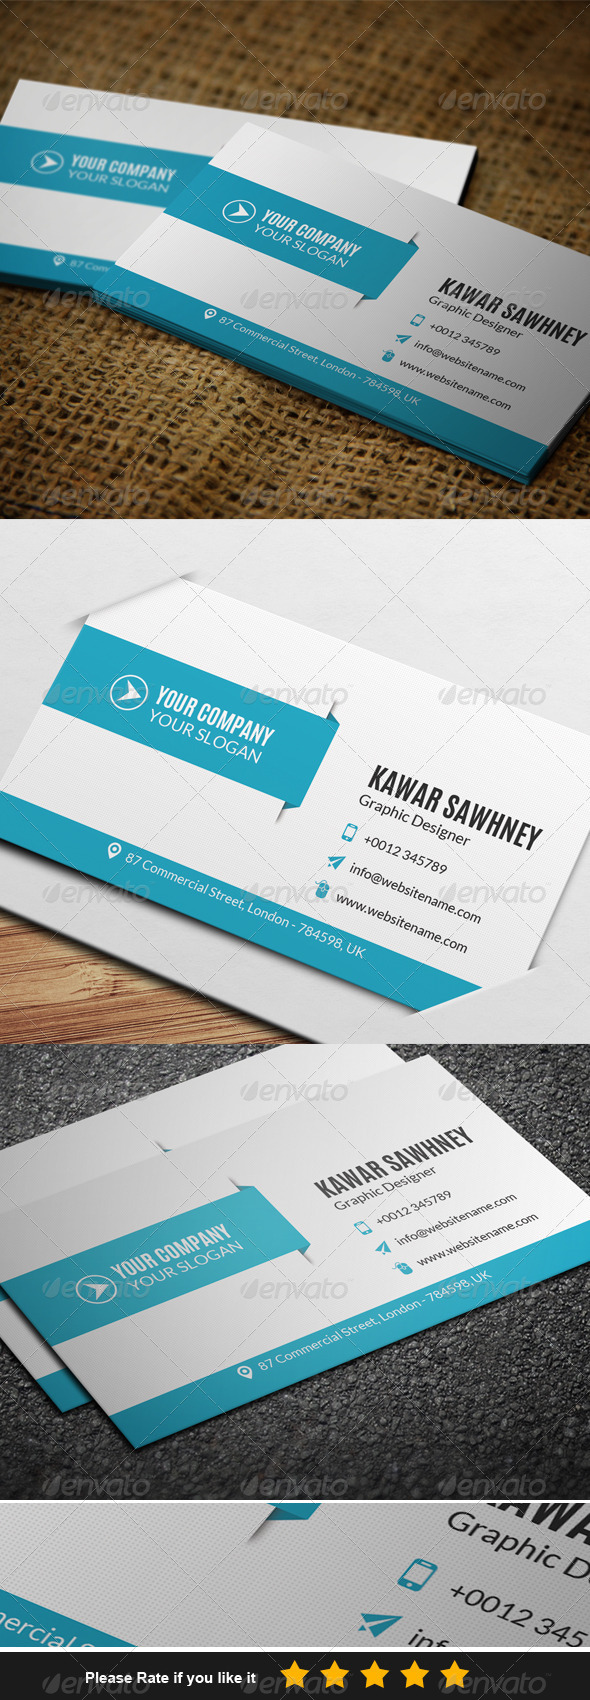 GraphicRiver Corporate Business Card 1 7646575